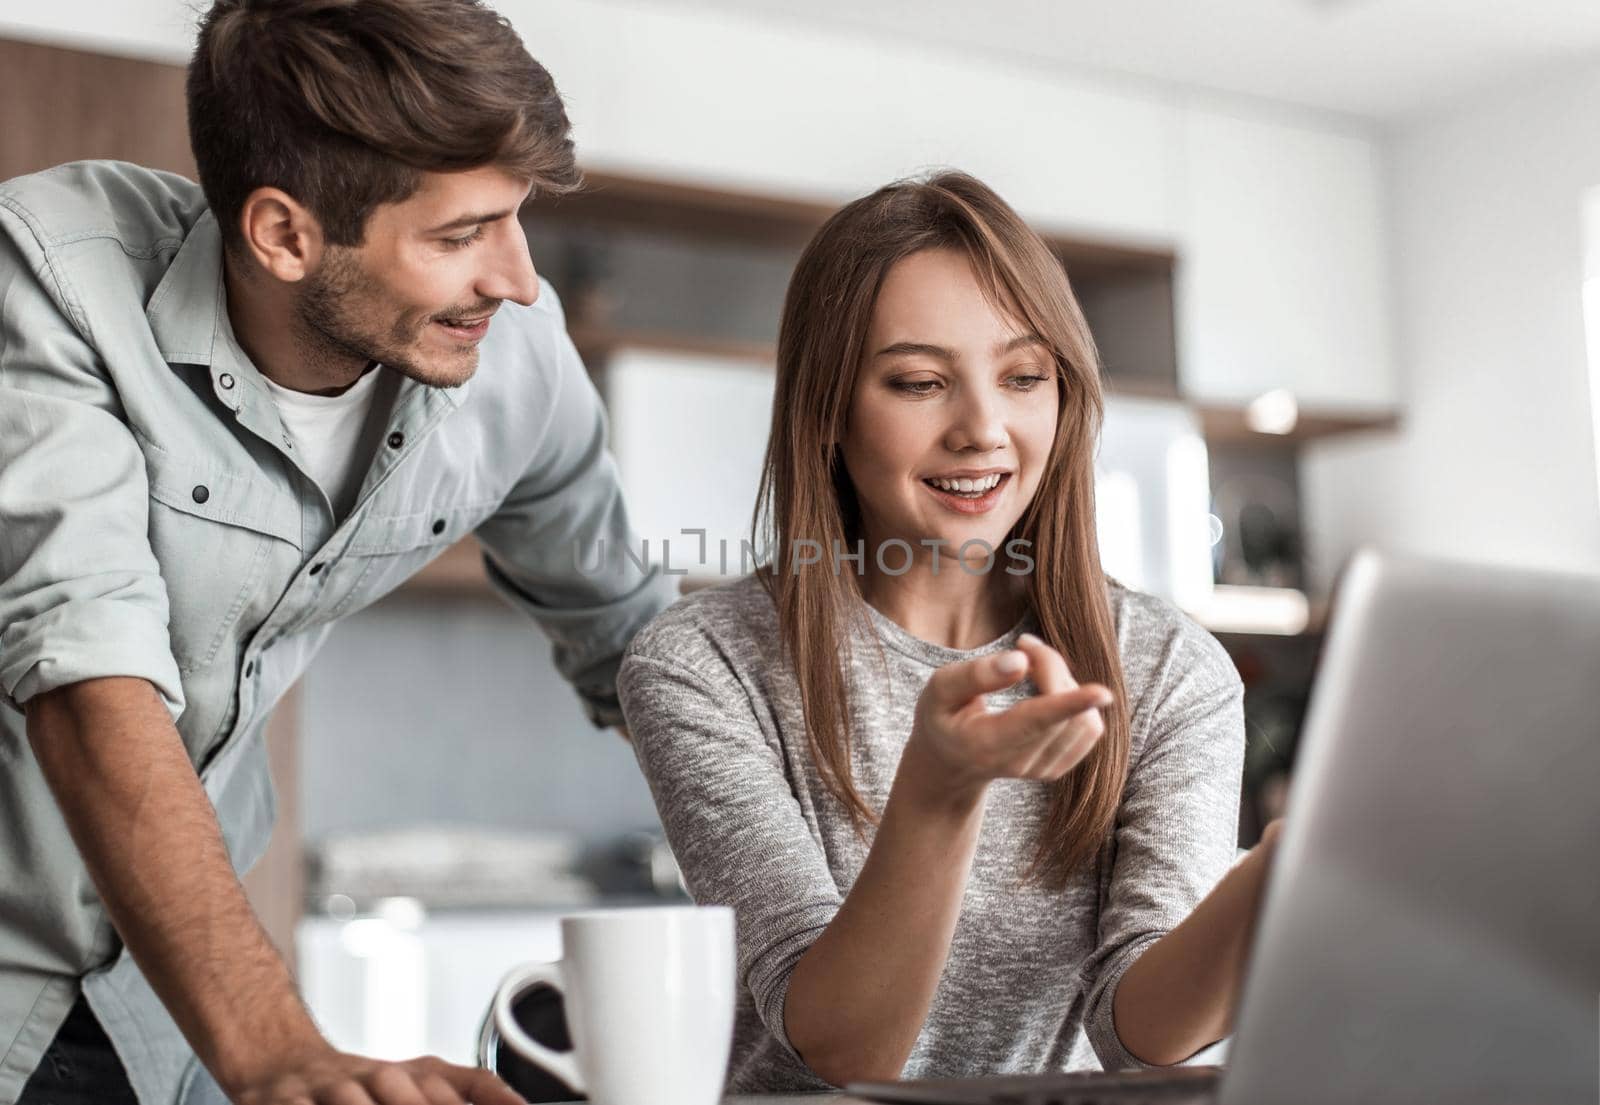 Cute couple using laptop together at home in the kitchen by asdf